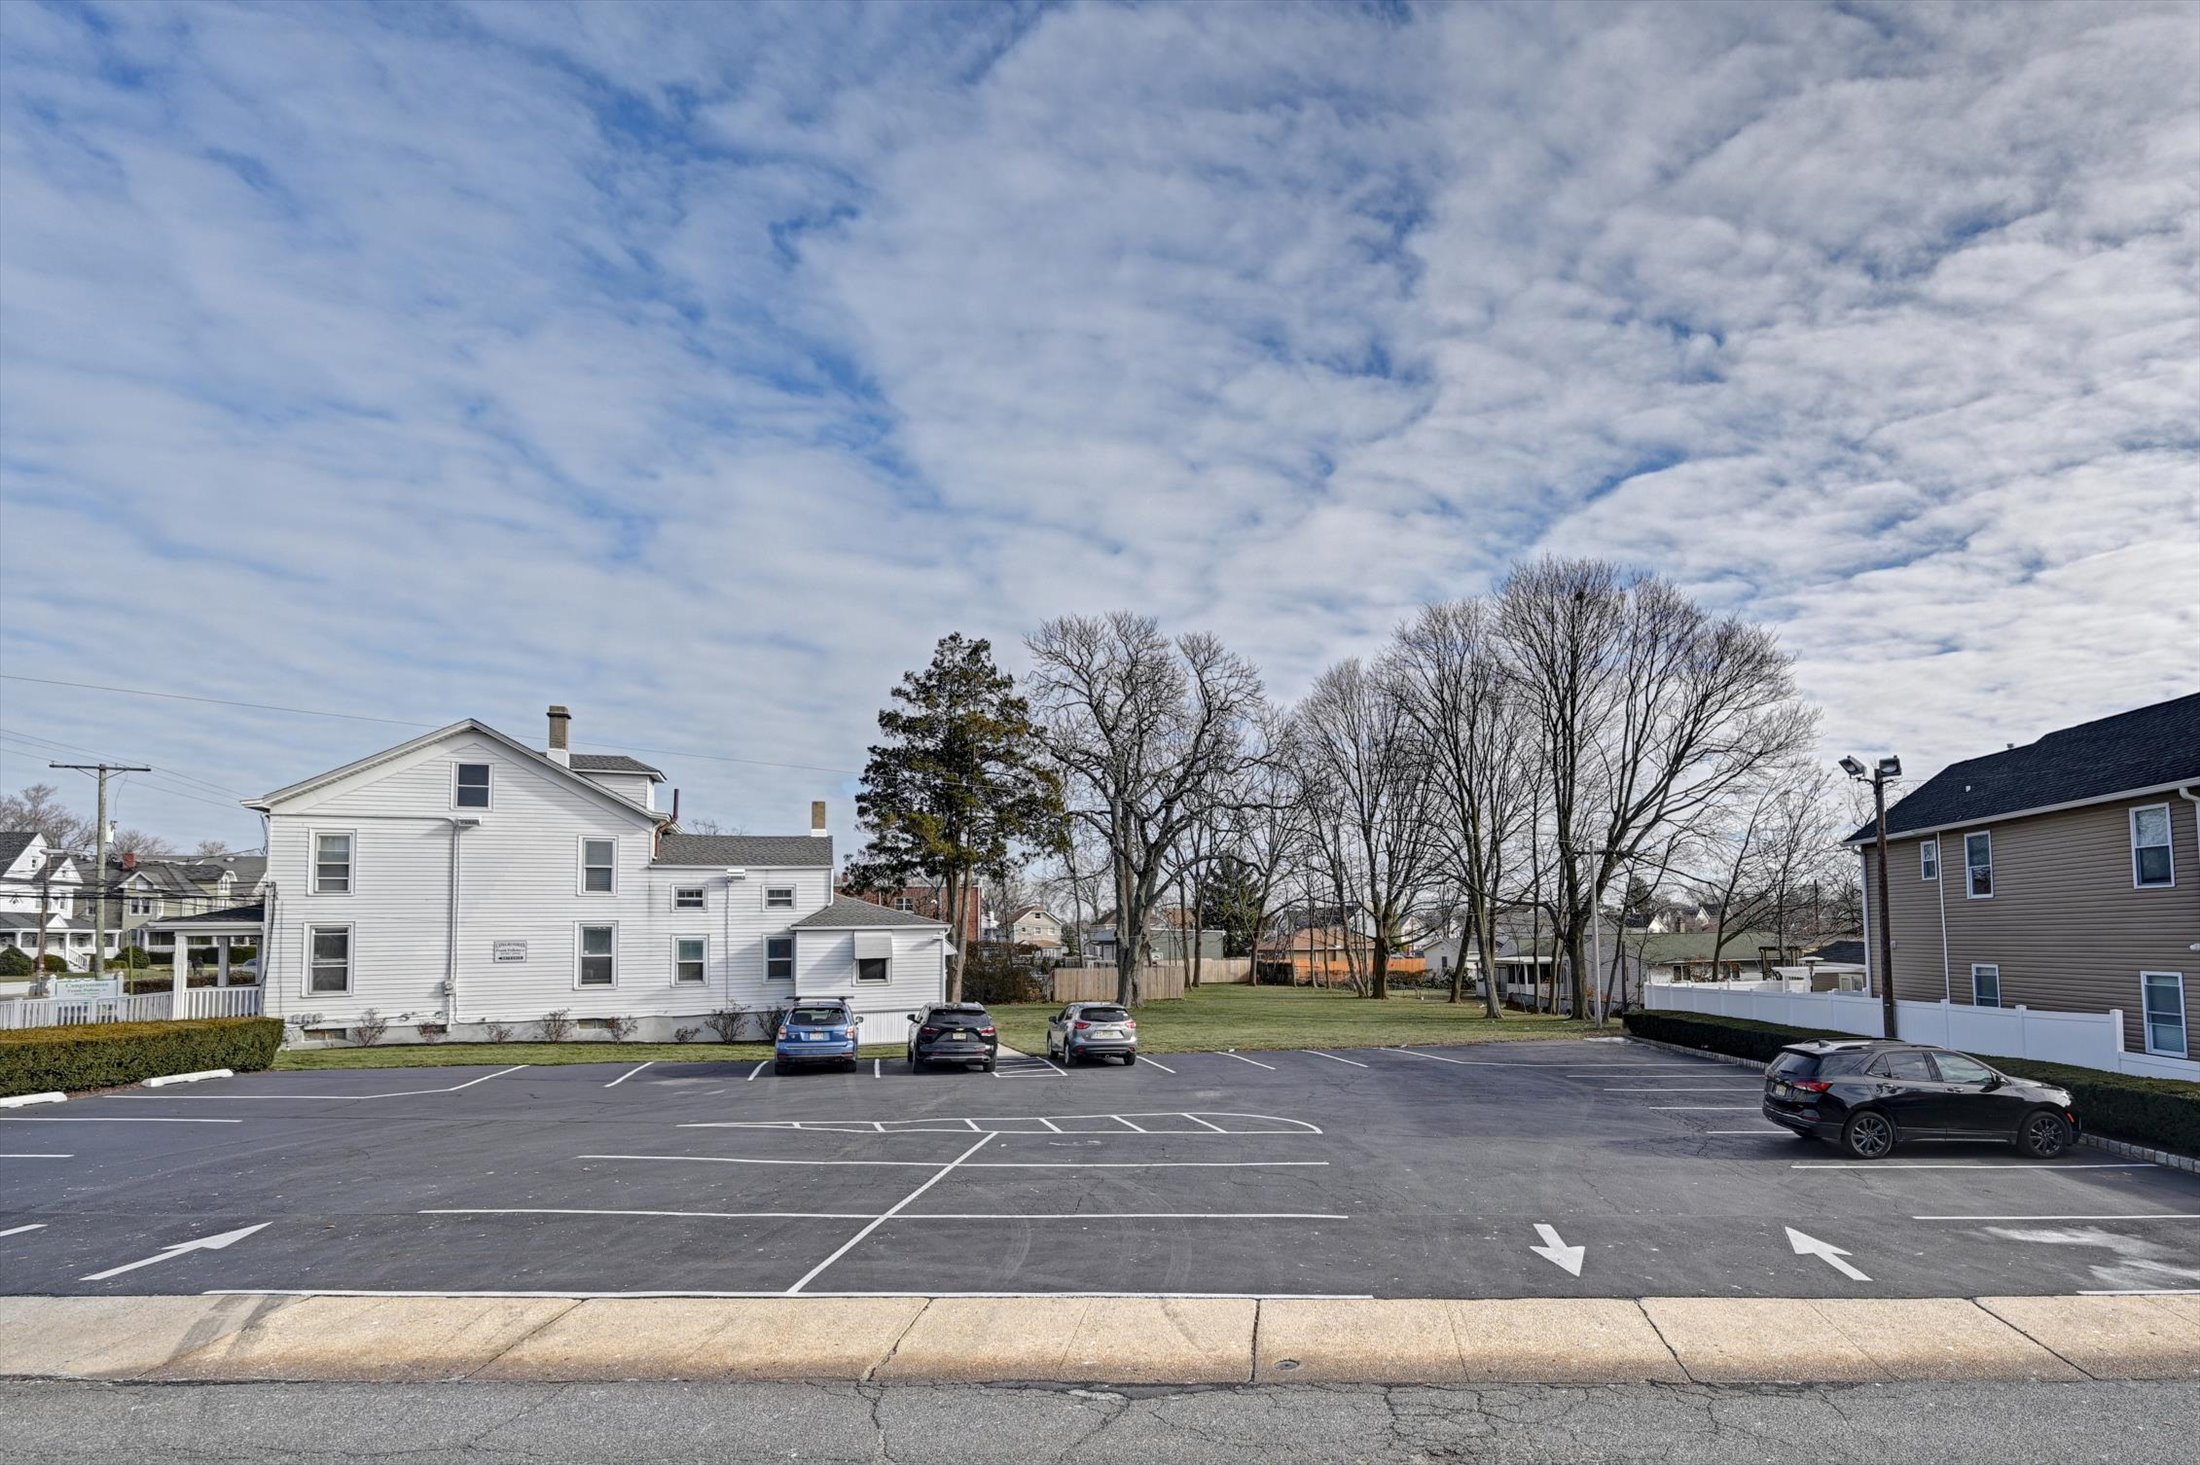 Parking lot at 
Woolley-Boglioli Funeral Home
10 Morrell St
Long Branch, NJ 07740